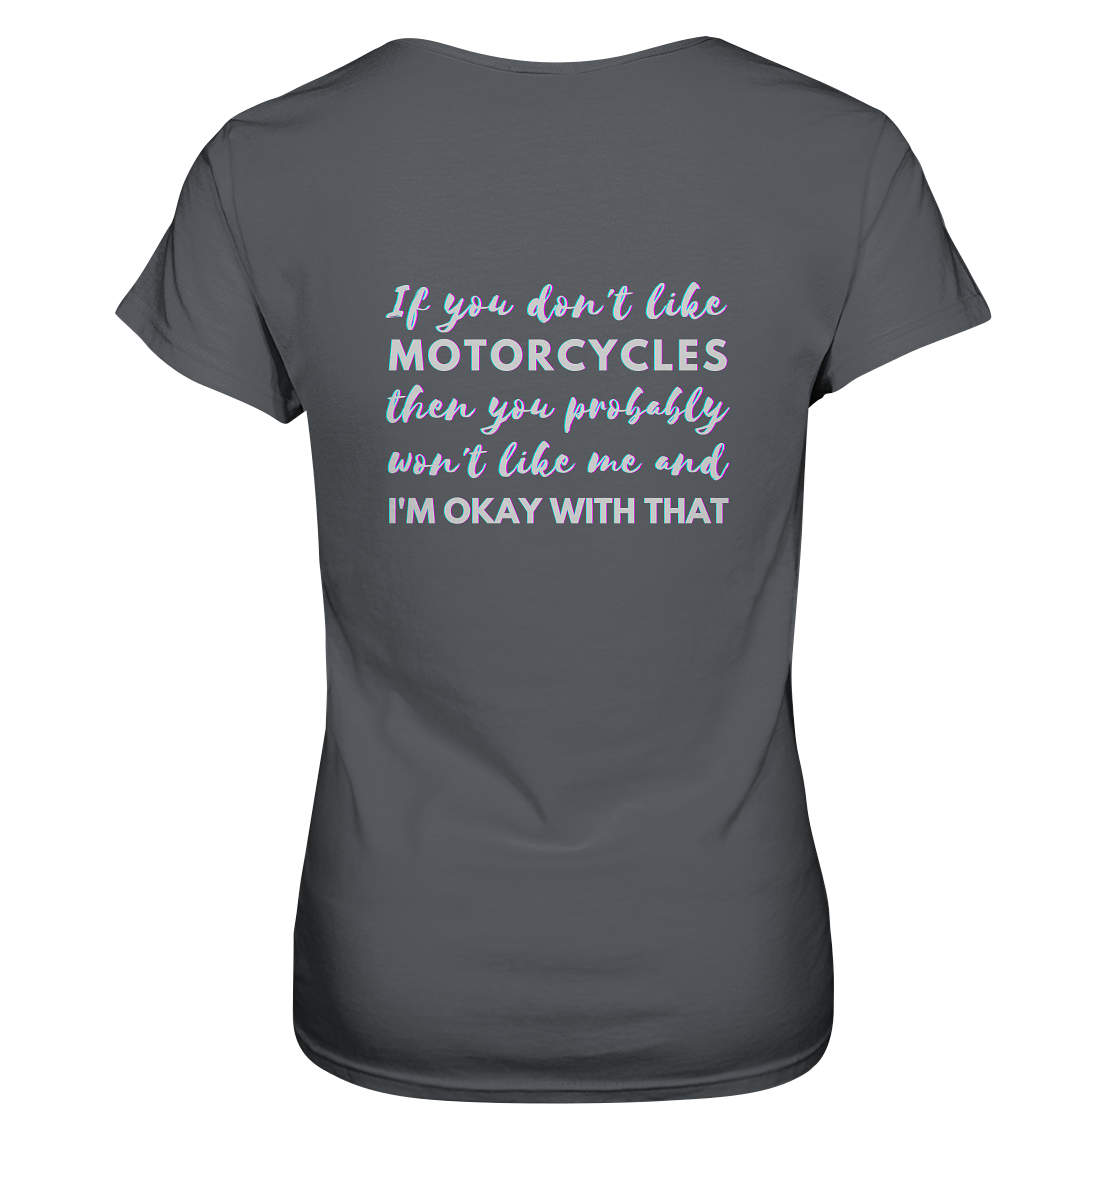 Damen-T-Shirt, Rundhals, mit weißem Spruch auf dem Rücken "If you don't like motorcycles, you problably won't like me and I'm okay with that." grau